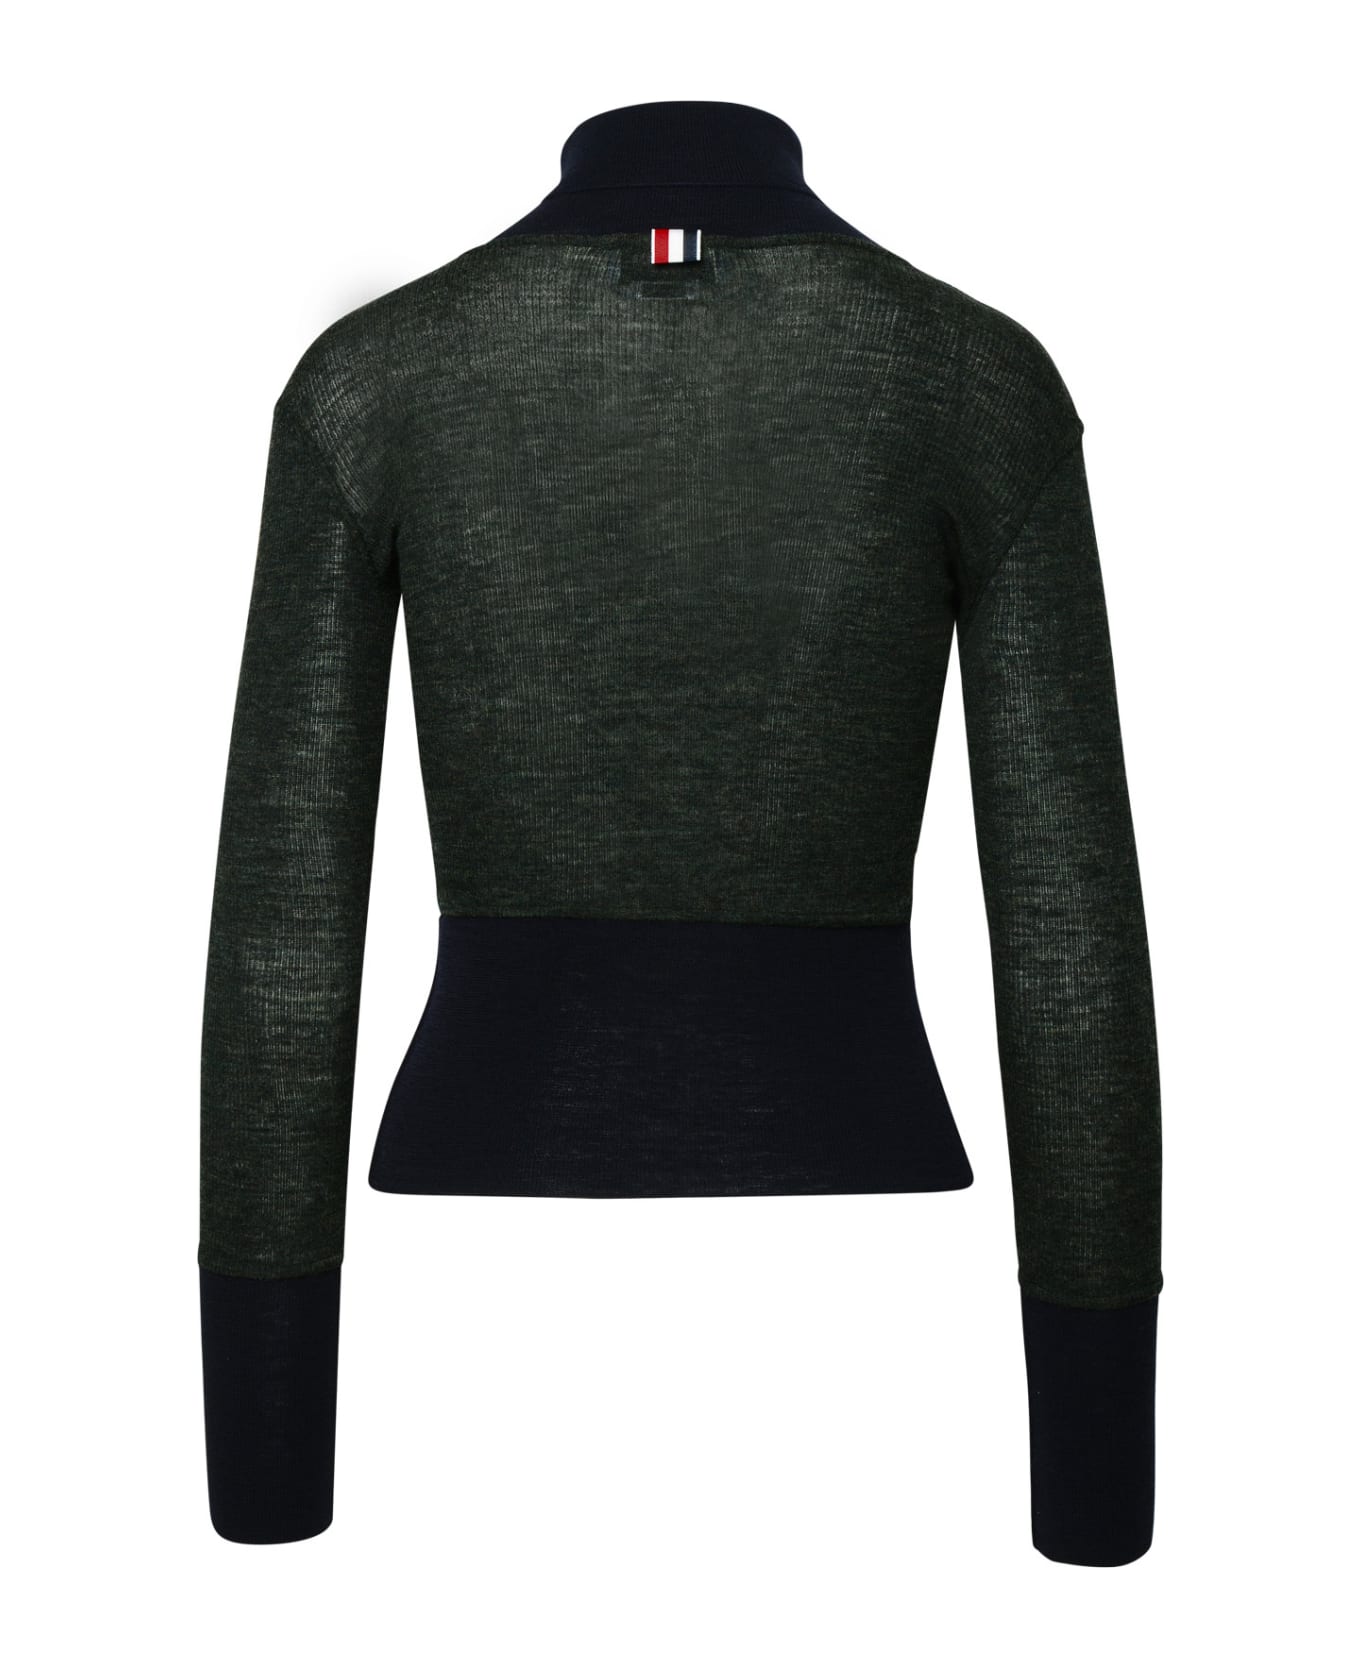 Thom Browne Green And Black Wool Turtleneck Sweater - Green